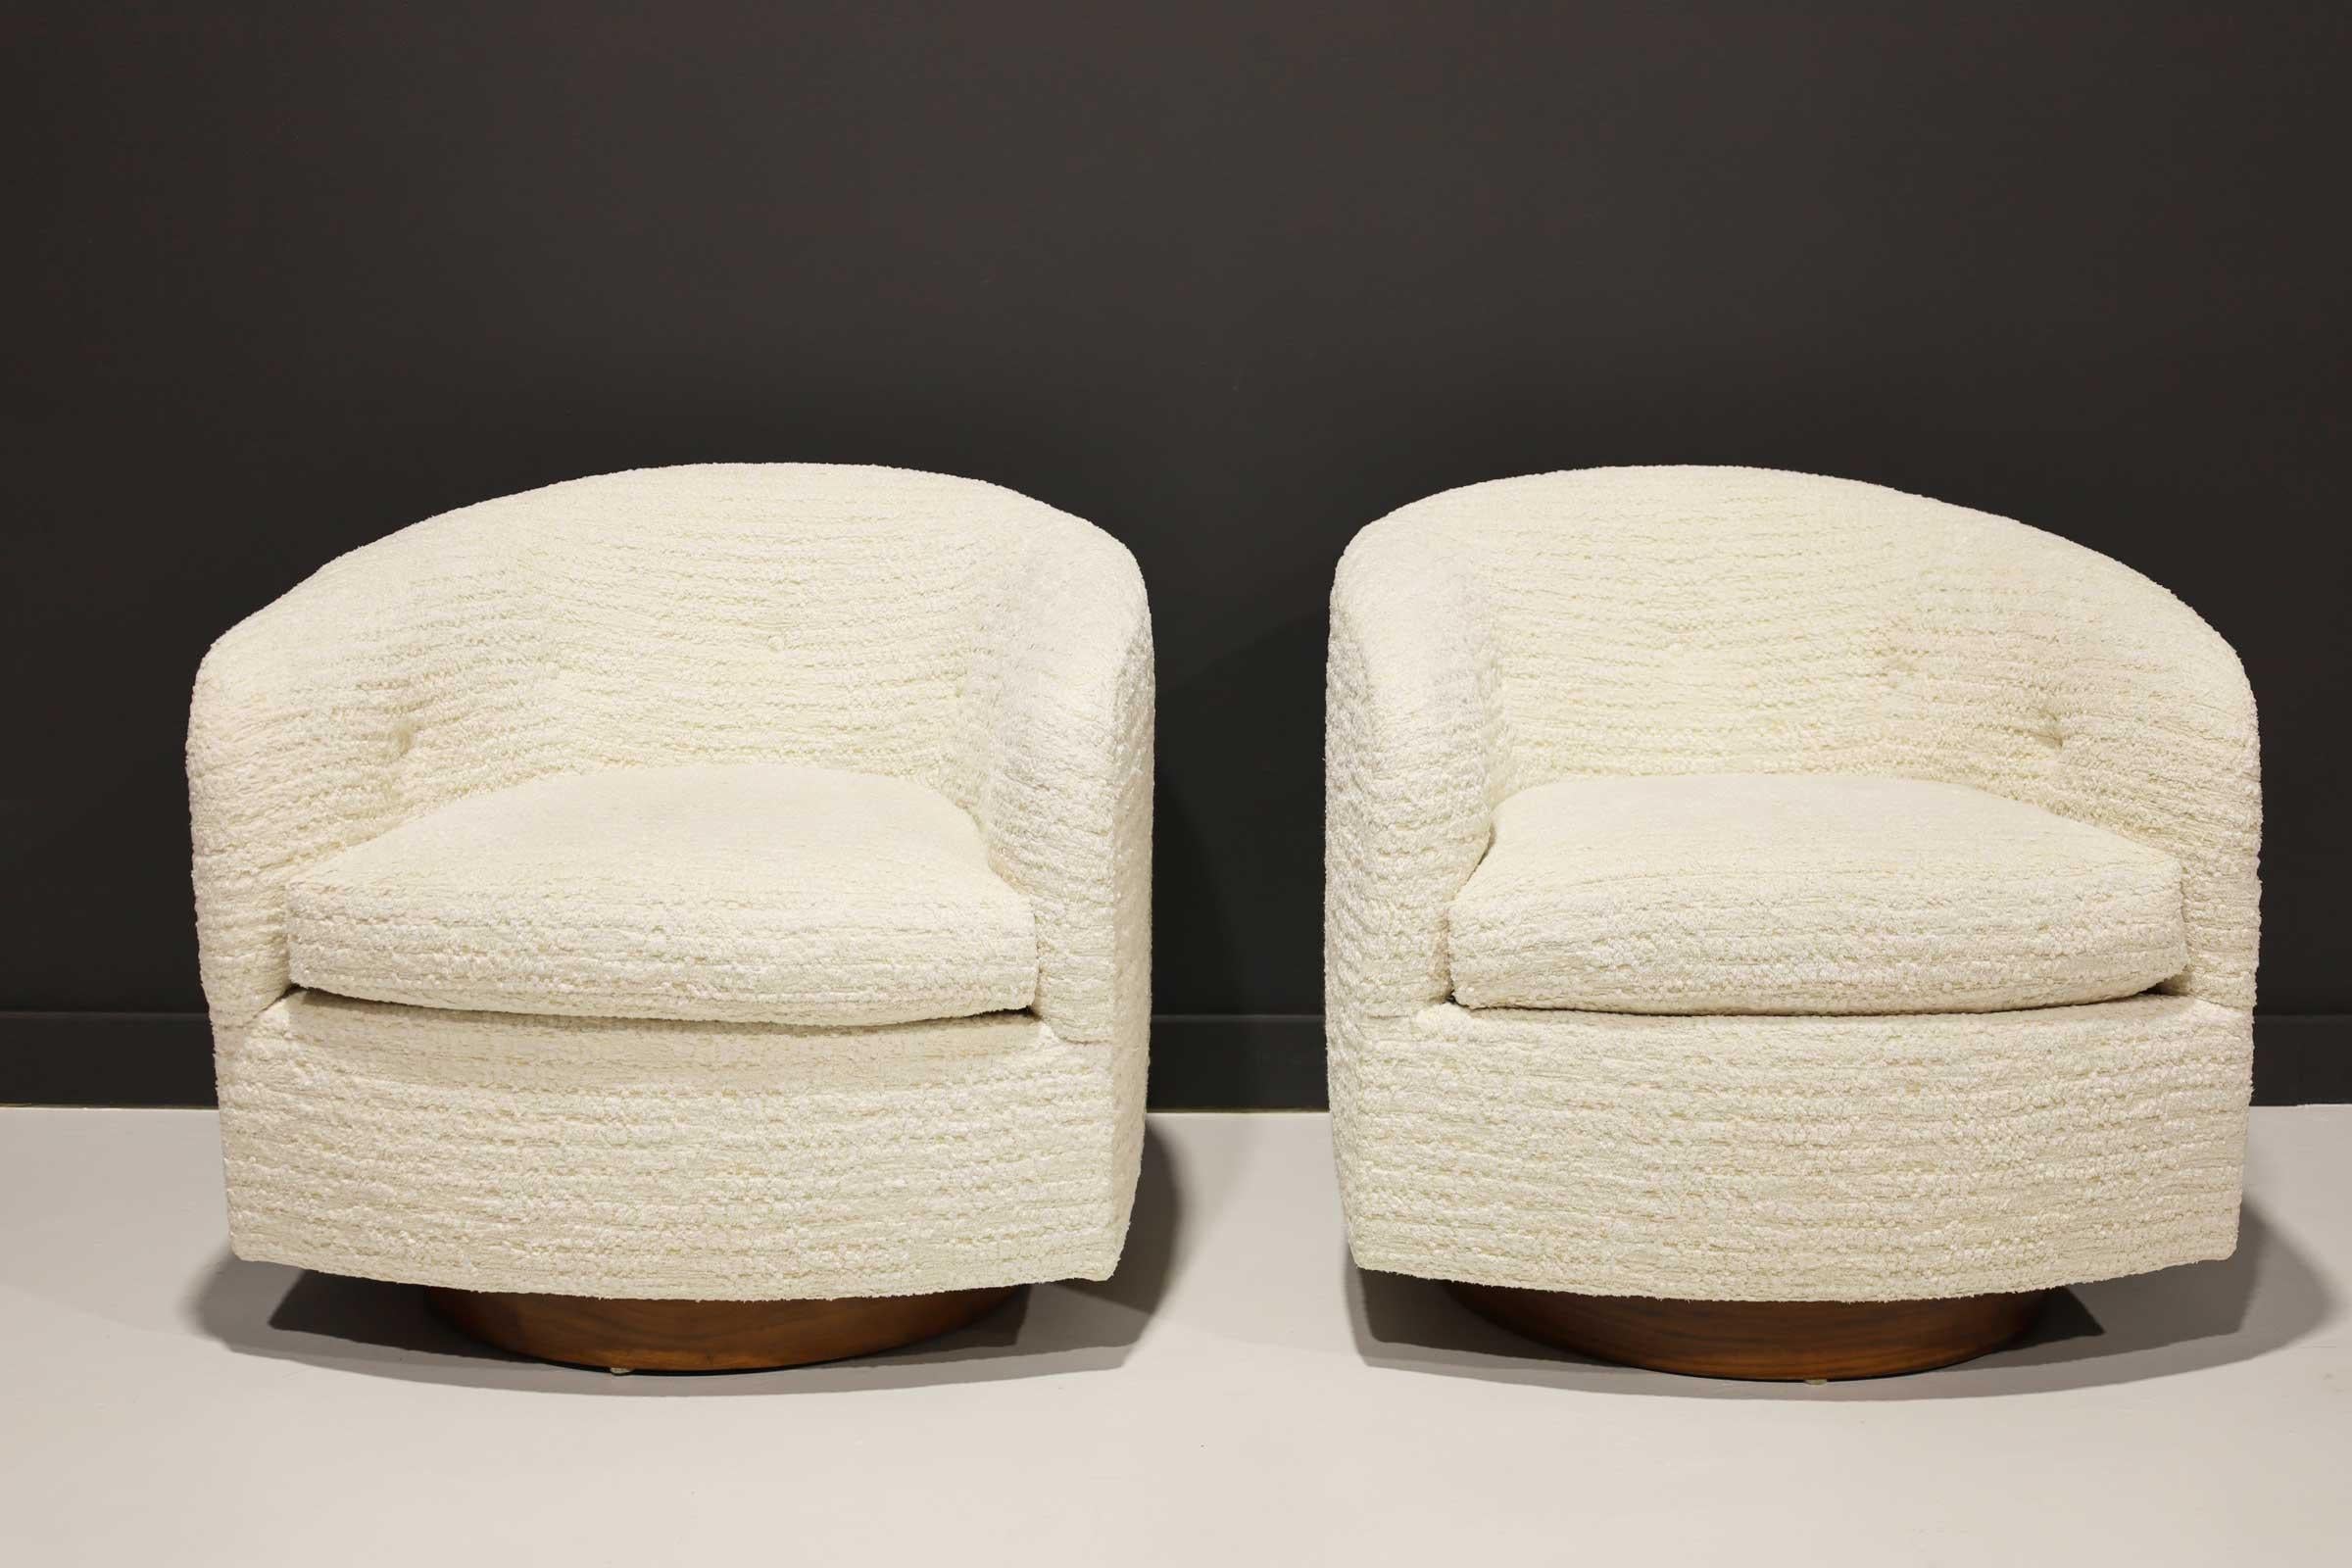 Milo Baughman's iconic tilt swivel newly upholstered in a off-white fluffy boucle by Kelly Wearstler. This chair has a walnut base and perfect proportions.